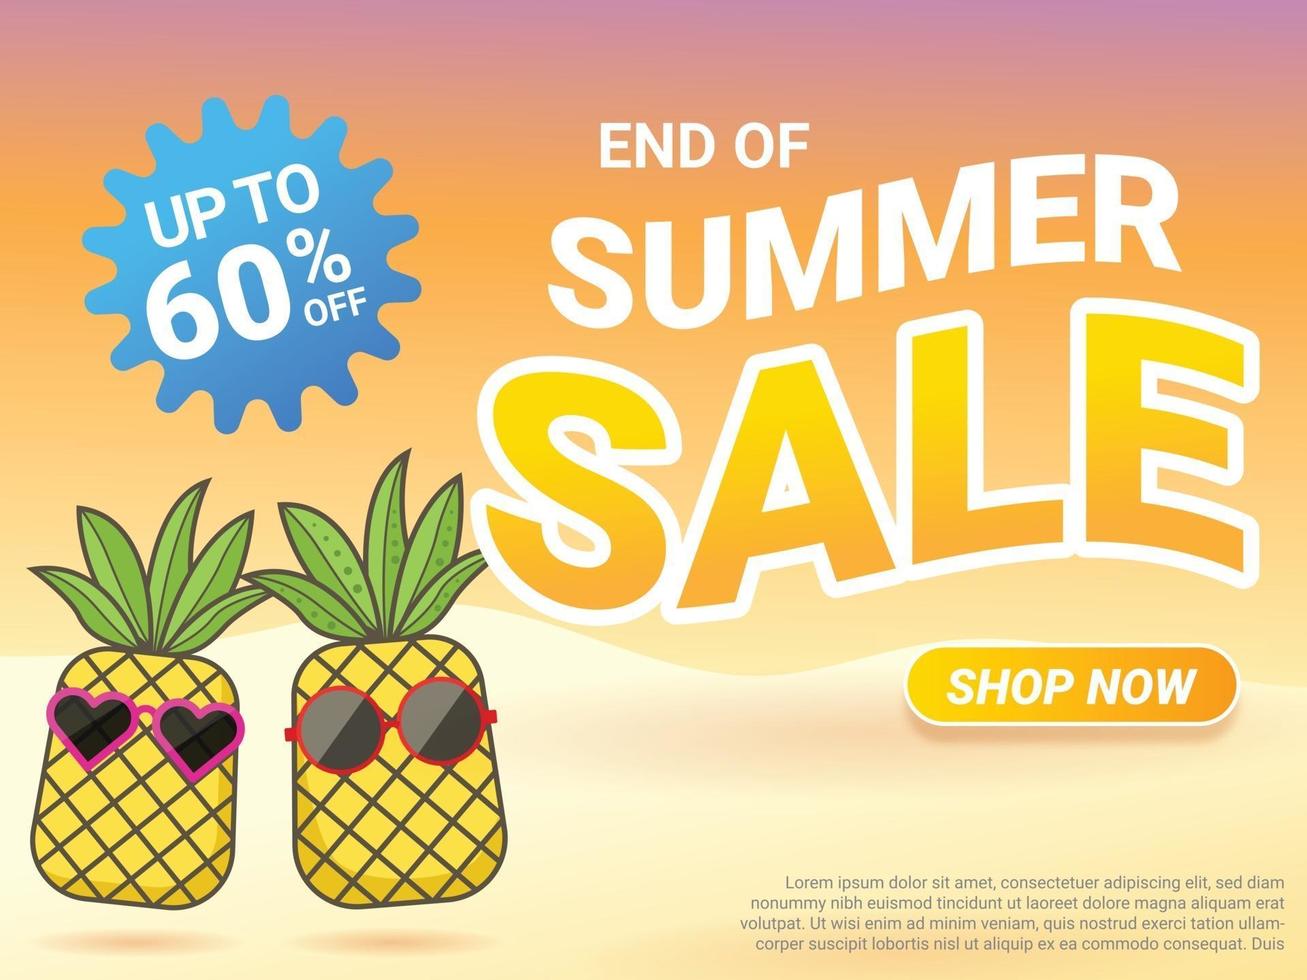 End of summer sale discounts vector